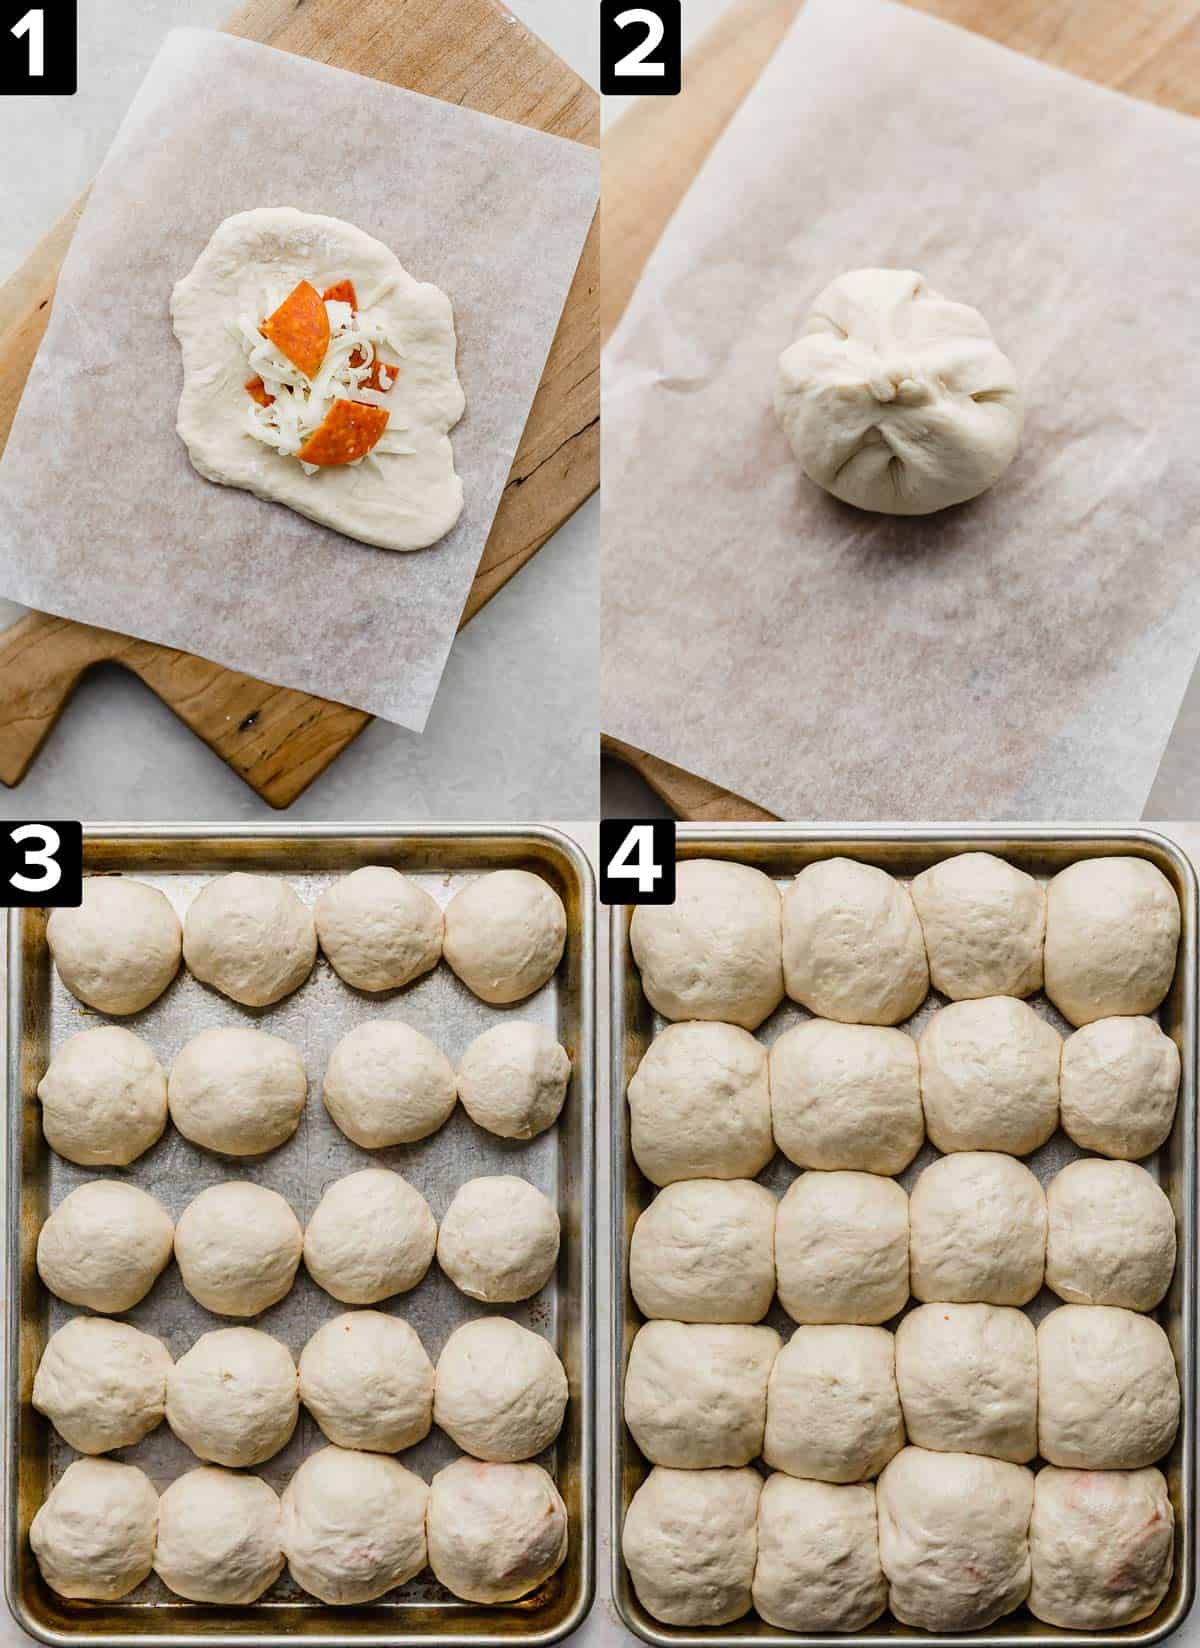 Four images showing how to roll up pizza rolls using pizza dough, bottom two photos is a photo of a baking sheet filled with unbaked Pizza Rolls.